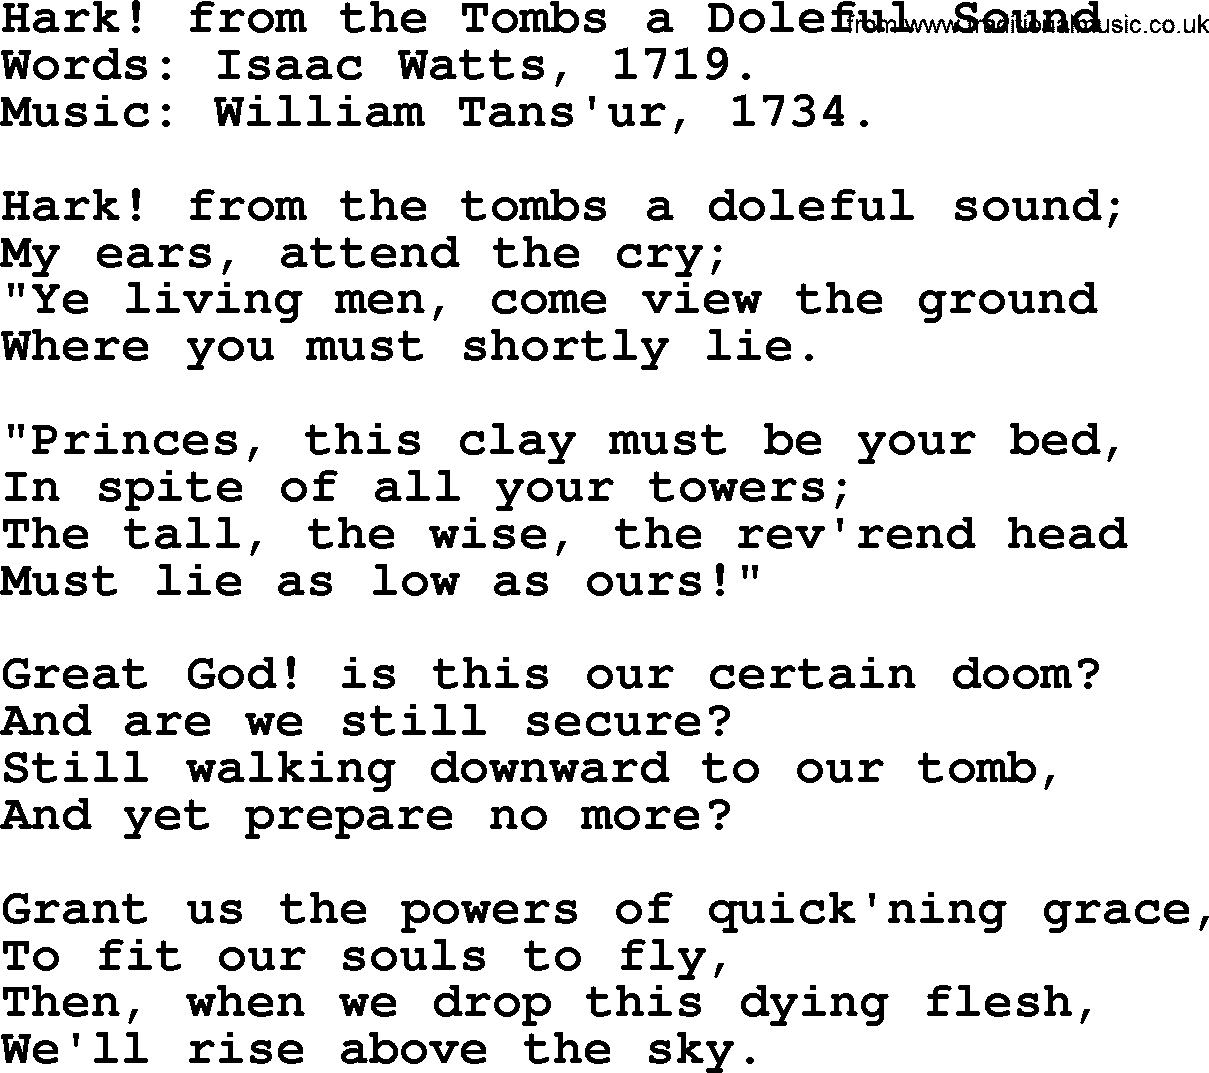 100+ Christian Funeral Hymns collection, Hymn: Hark! from the Tombs a Doleful Sound, lyrics and PDF